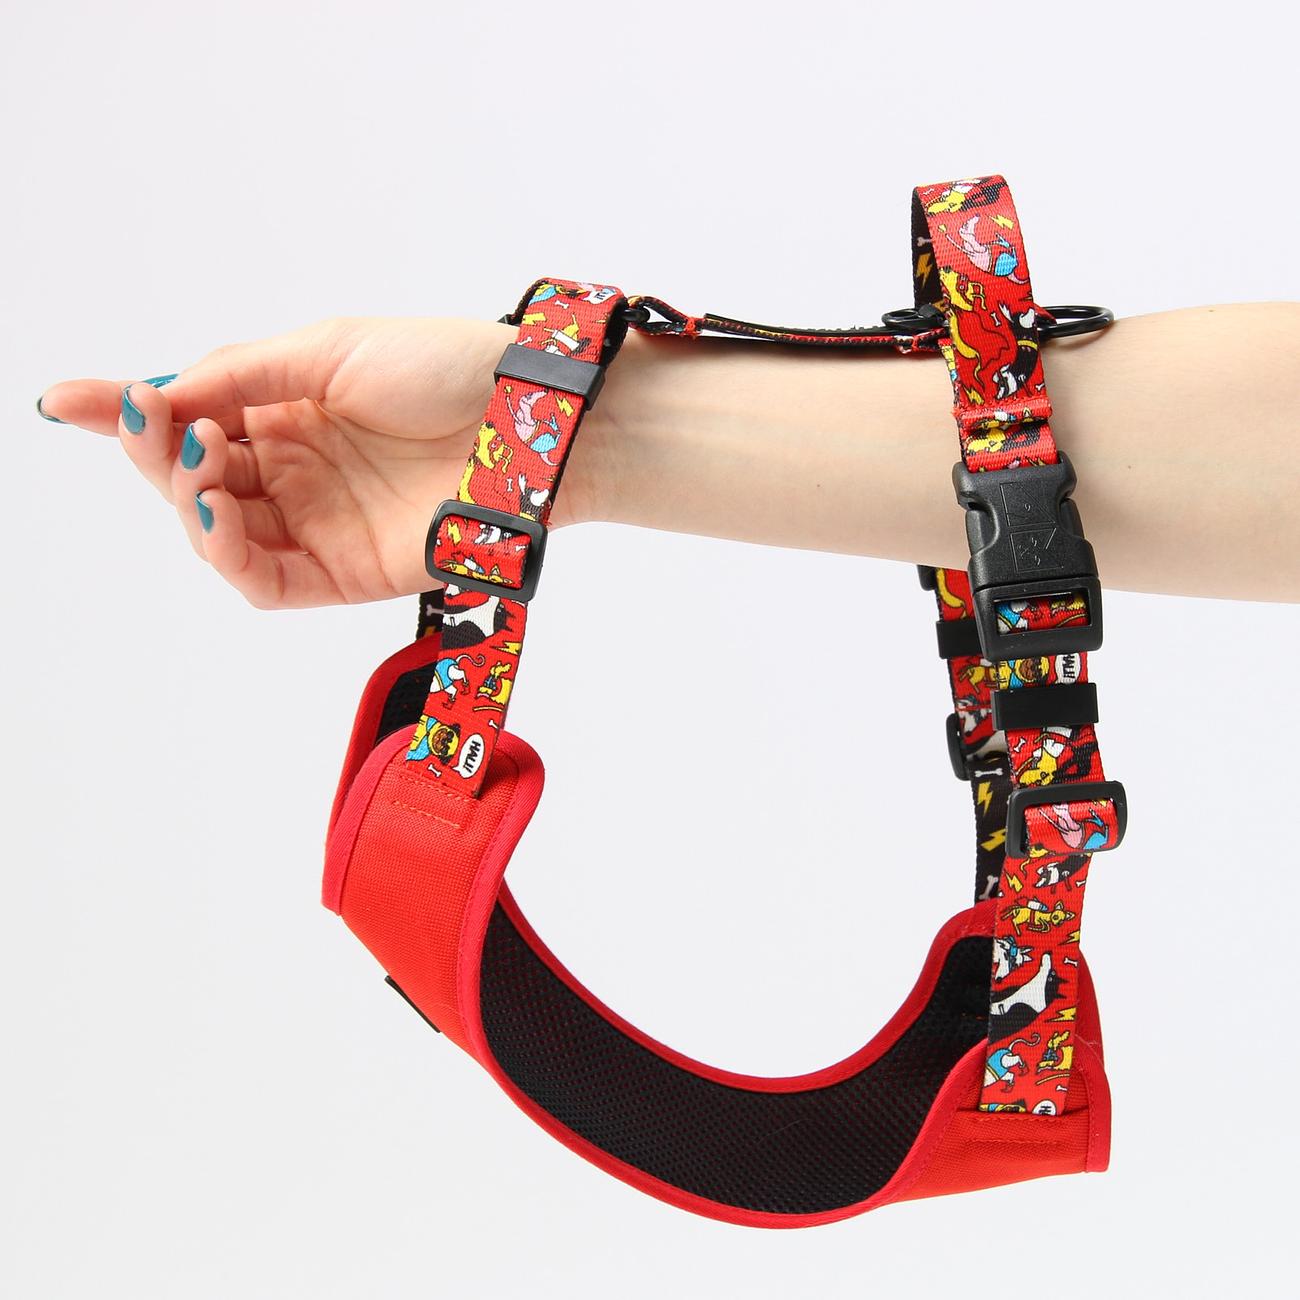 Dog or cat pressure free harness "Woof for the better world" 